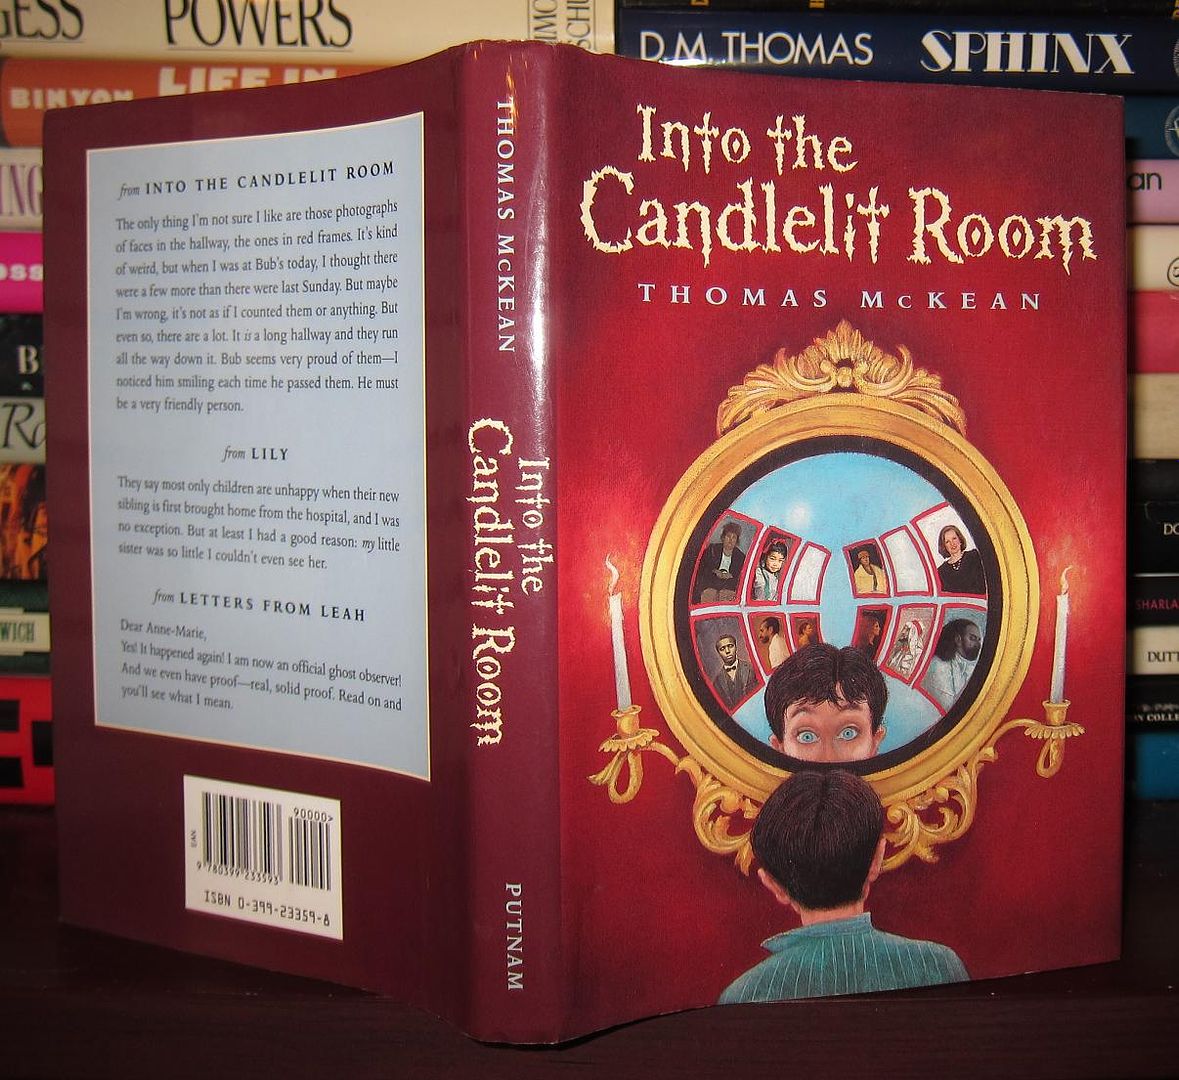 MCKEAN, TOM - Into the Candlelit Room